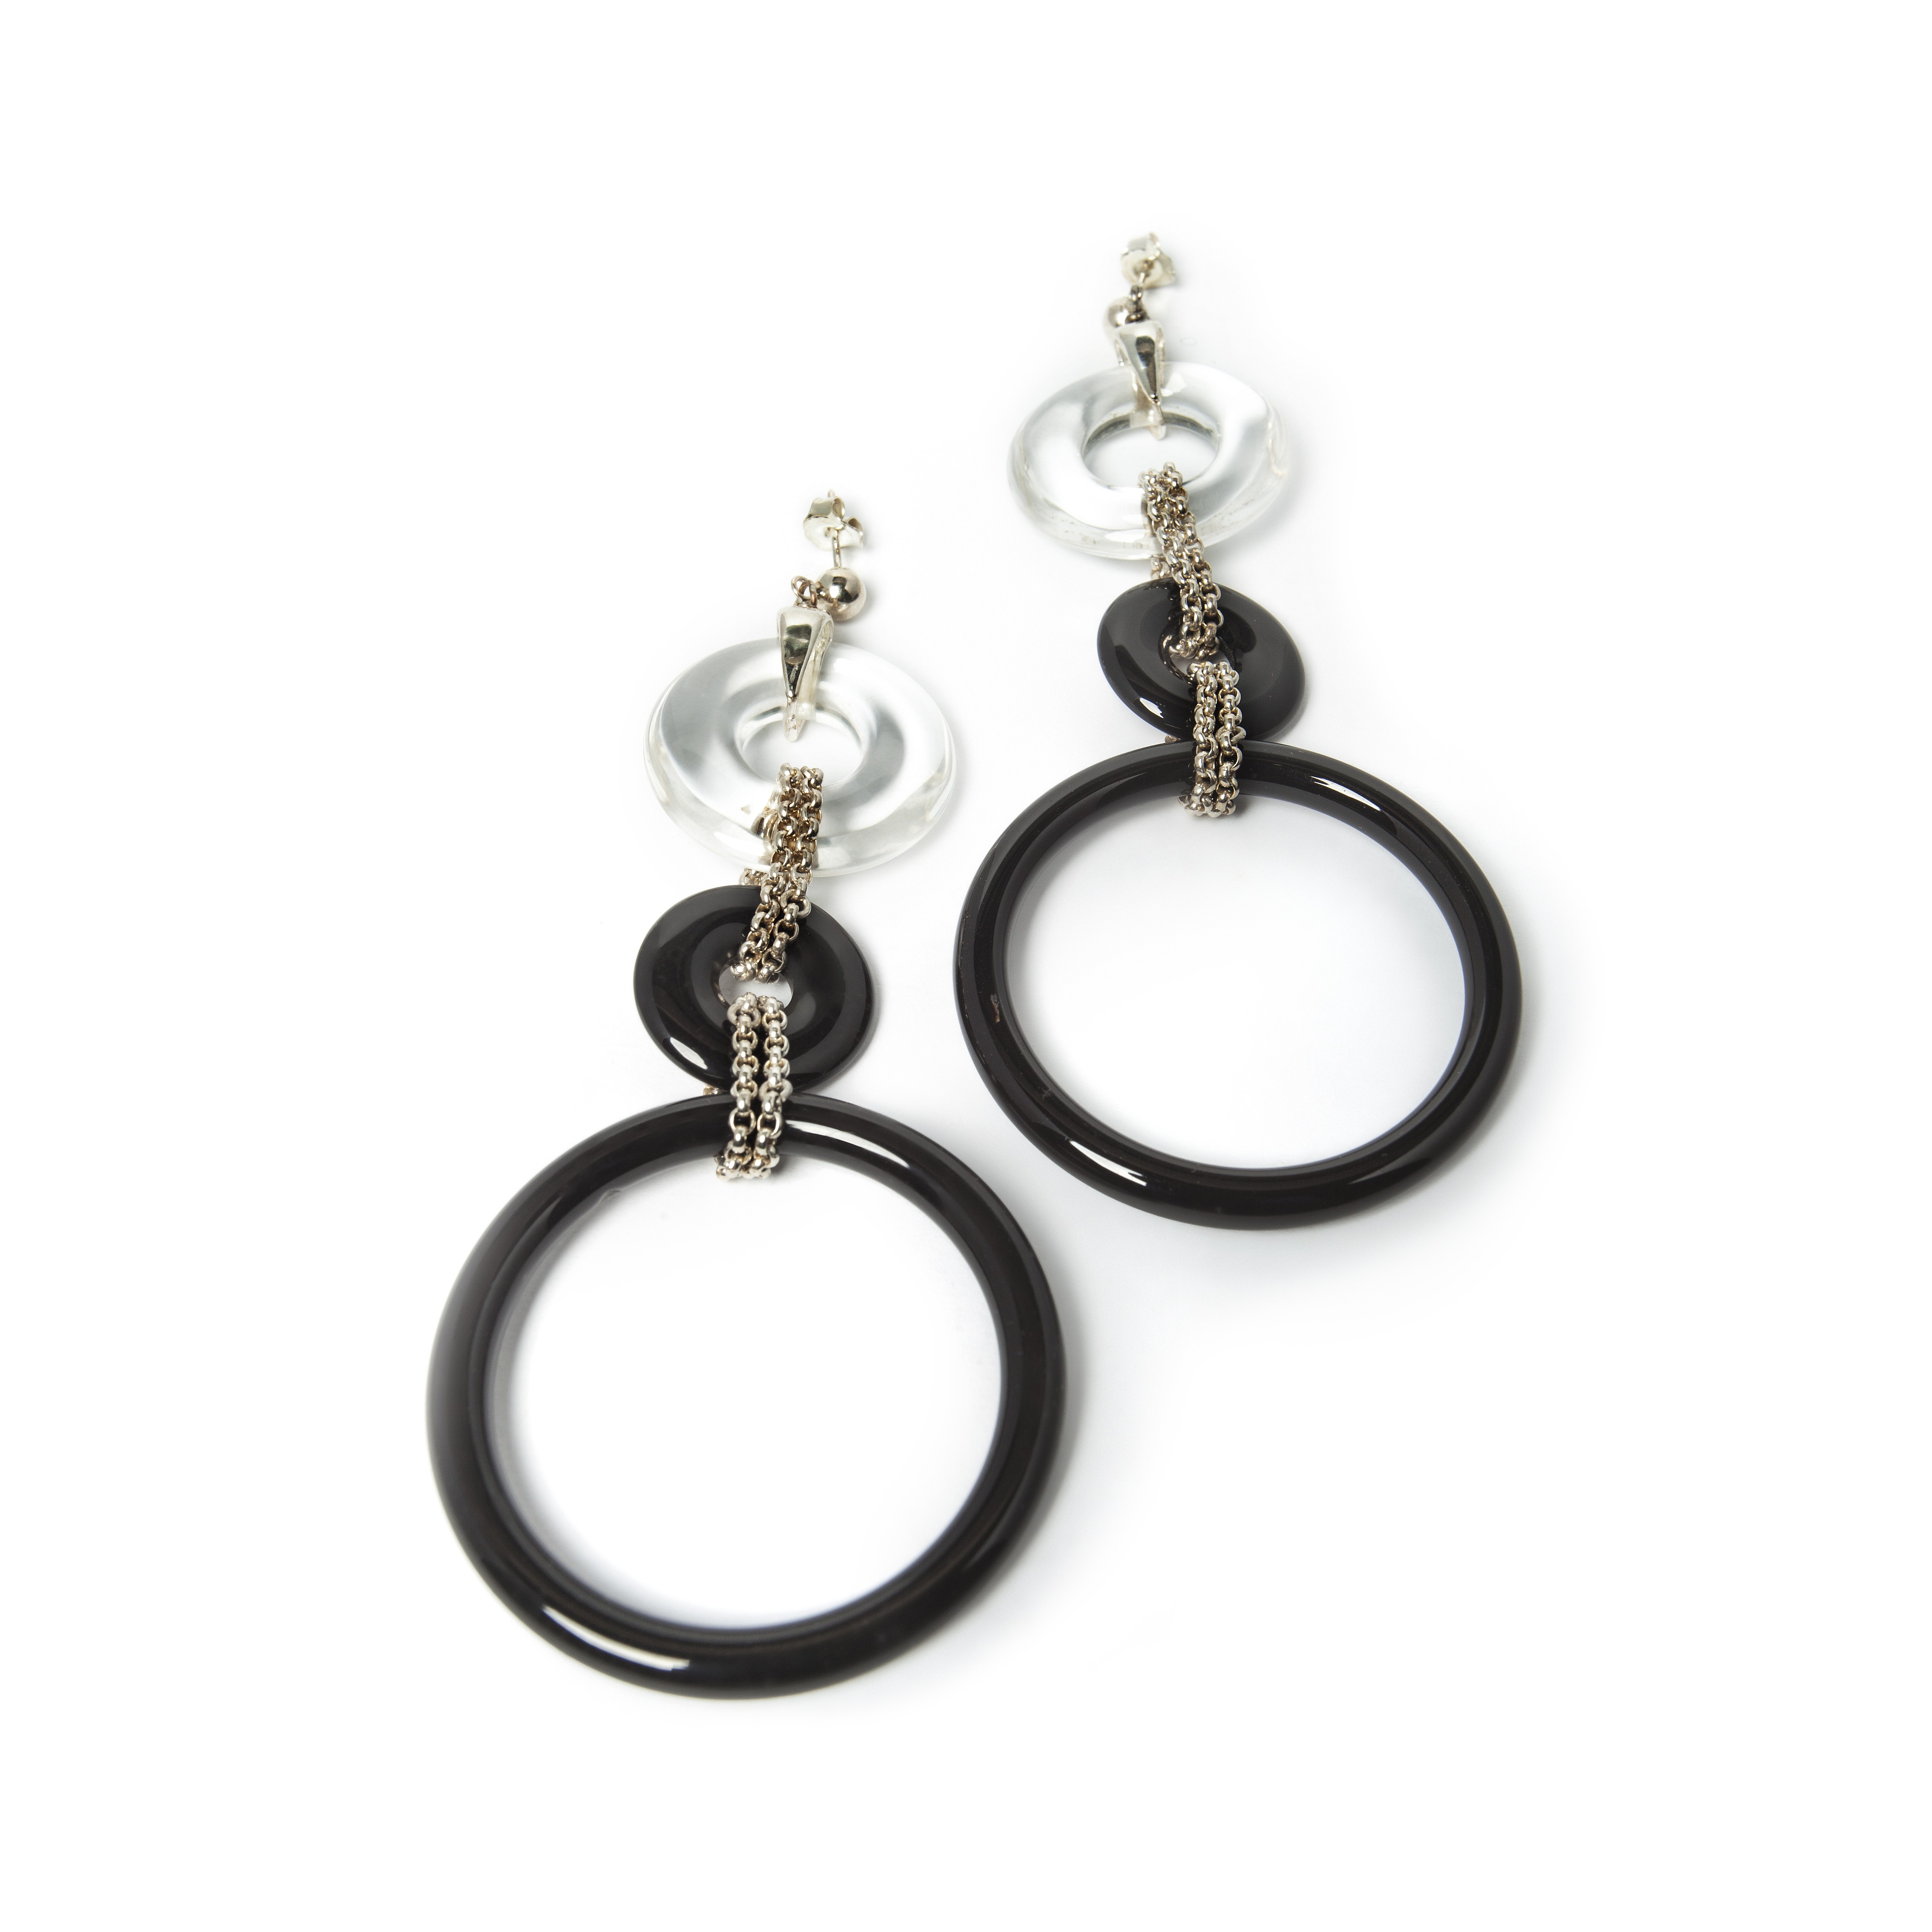 Silver earrings with Onix and Rock Cristal